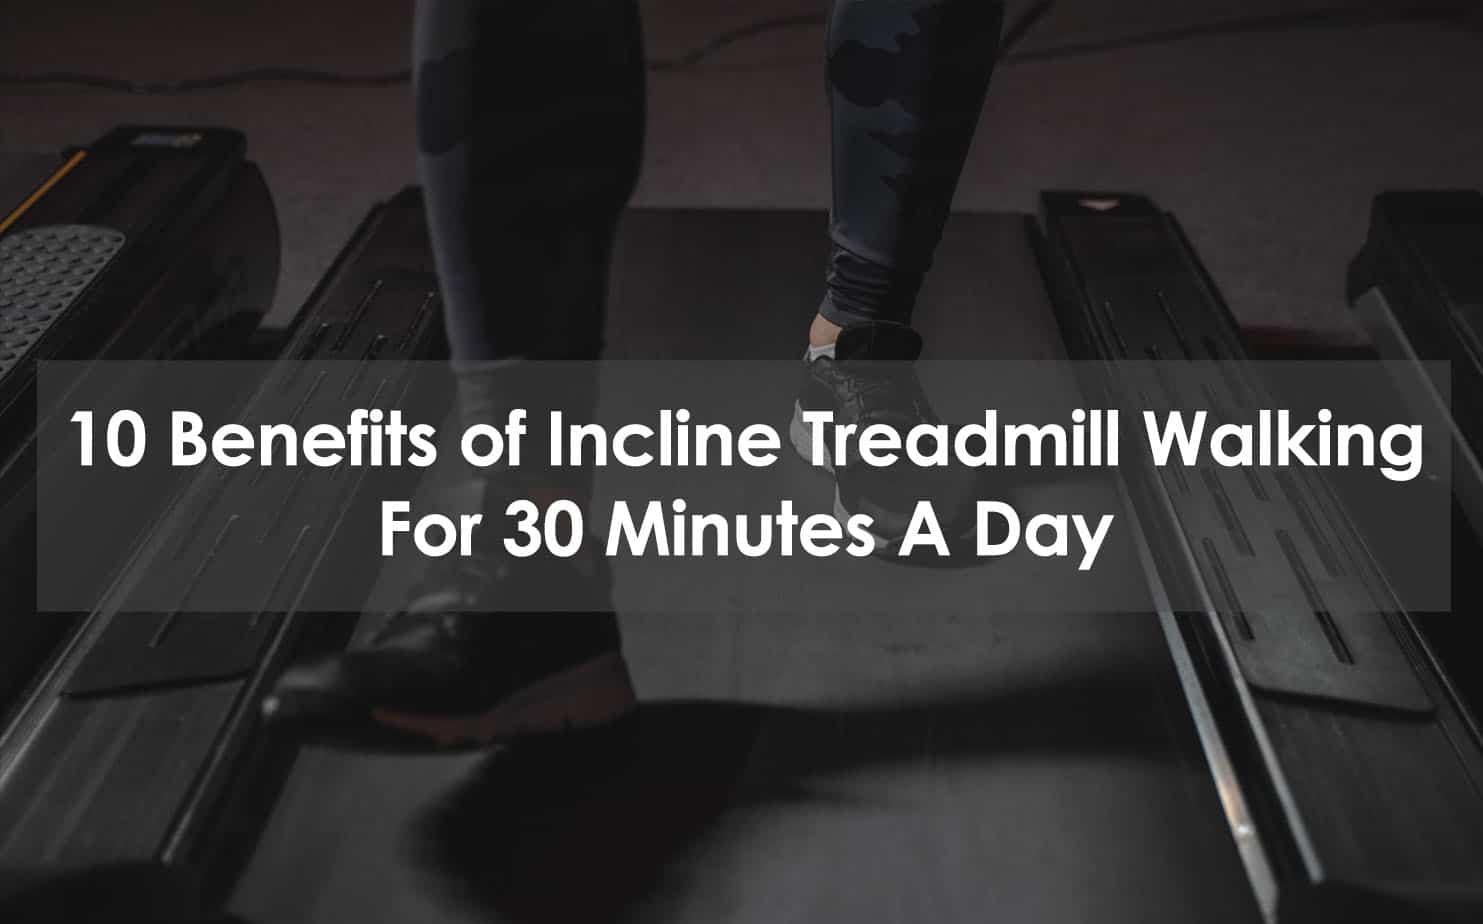 10 Benefits Of Incline Treadmill Walking For 30 Minutes A Day